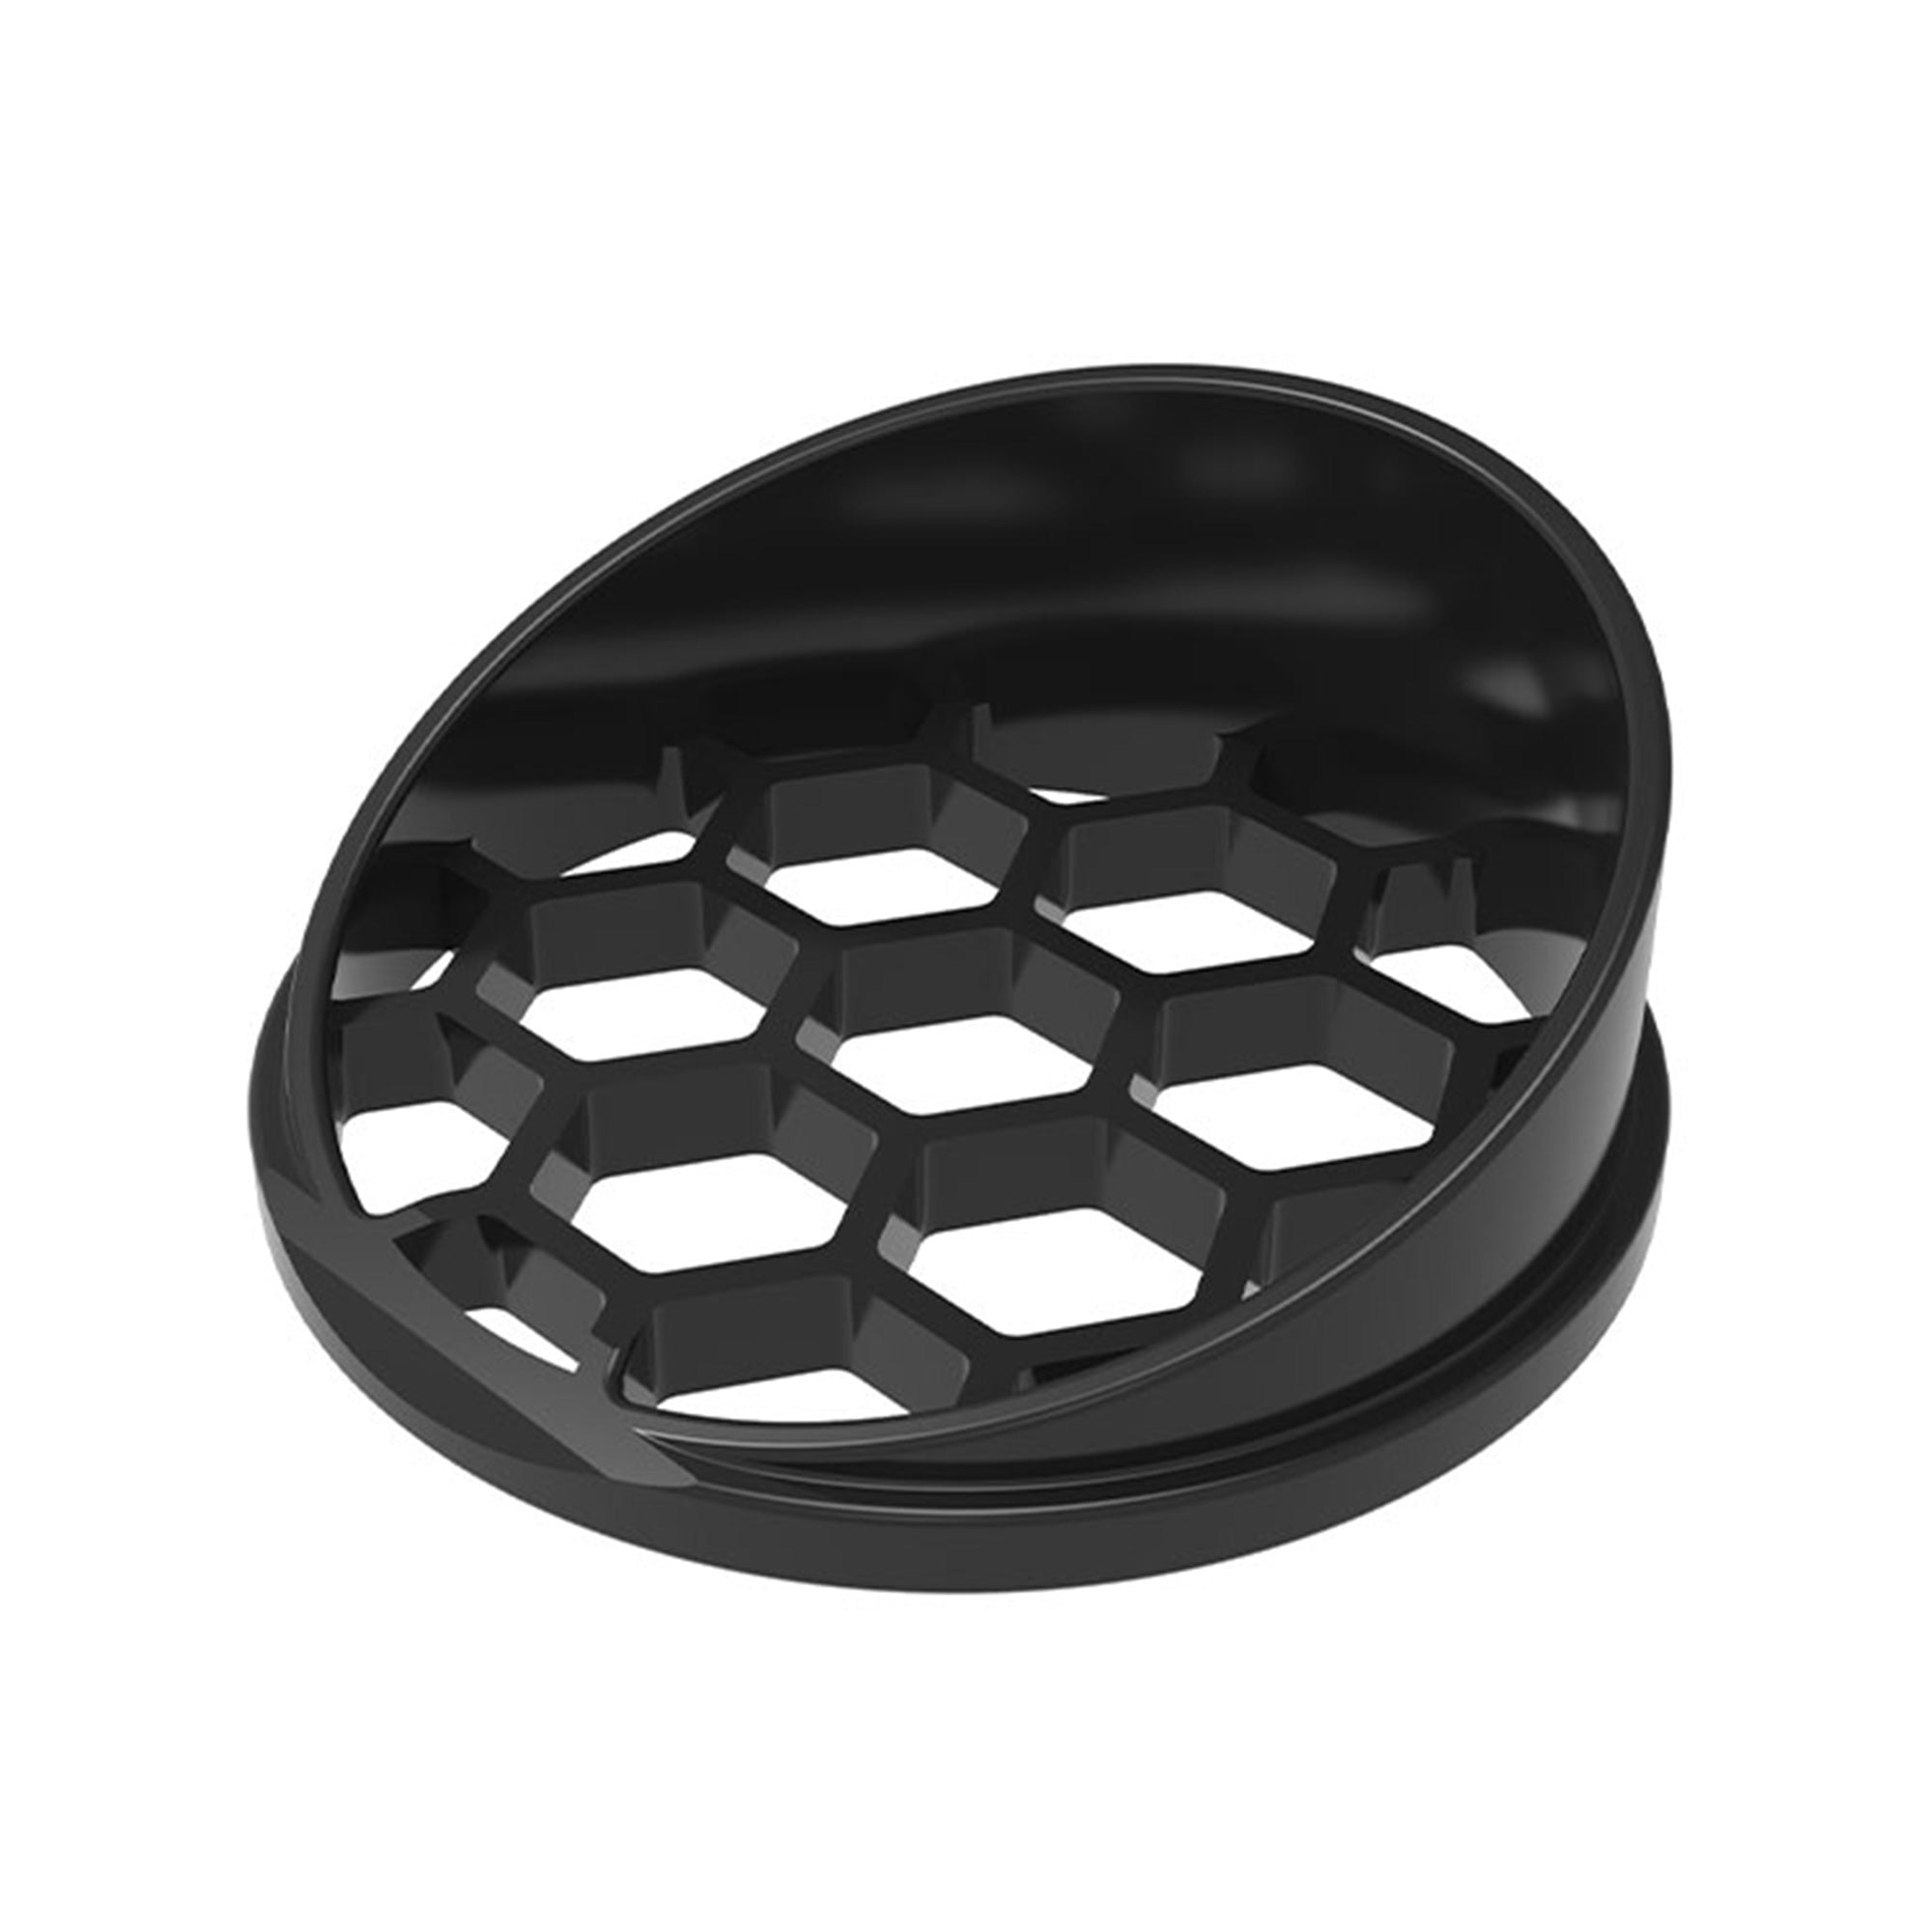 Snap-on Honeycomb Louver Glare Control for WAC Landscape Lighting Mini Accent Light